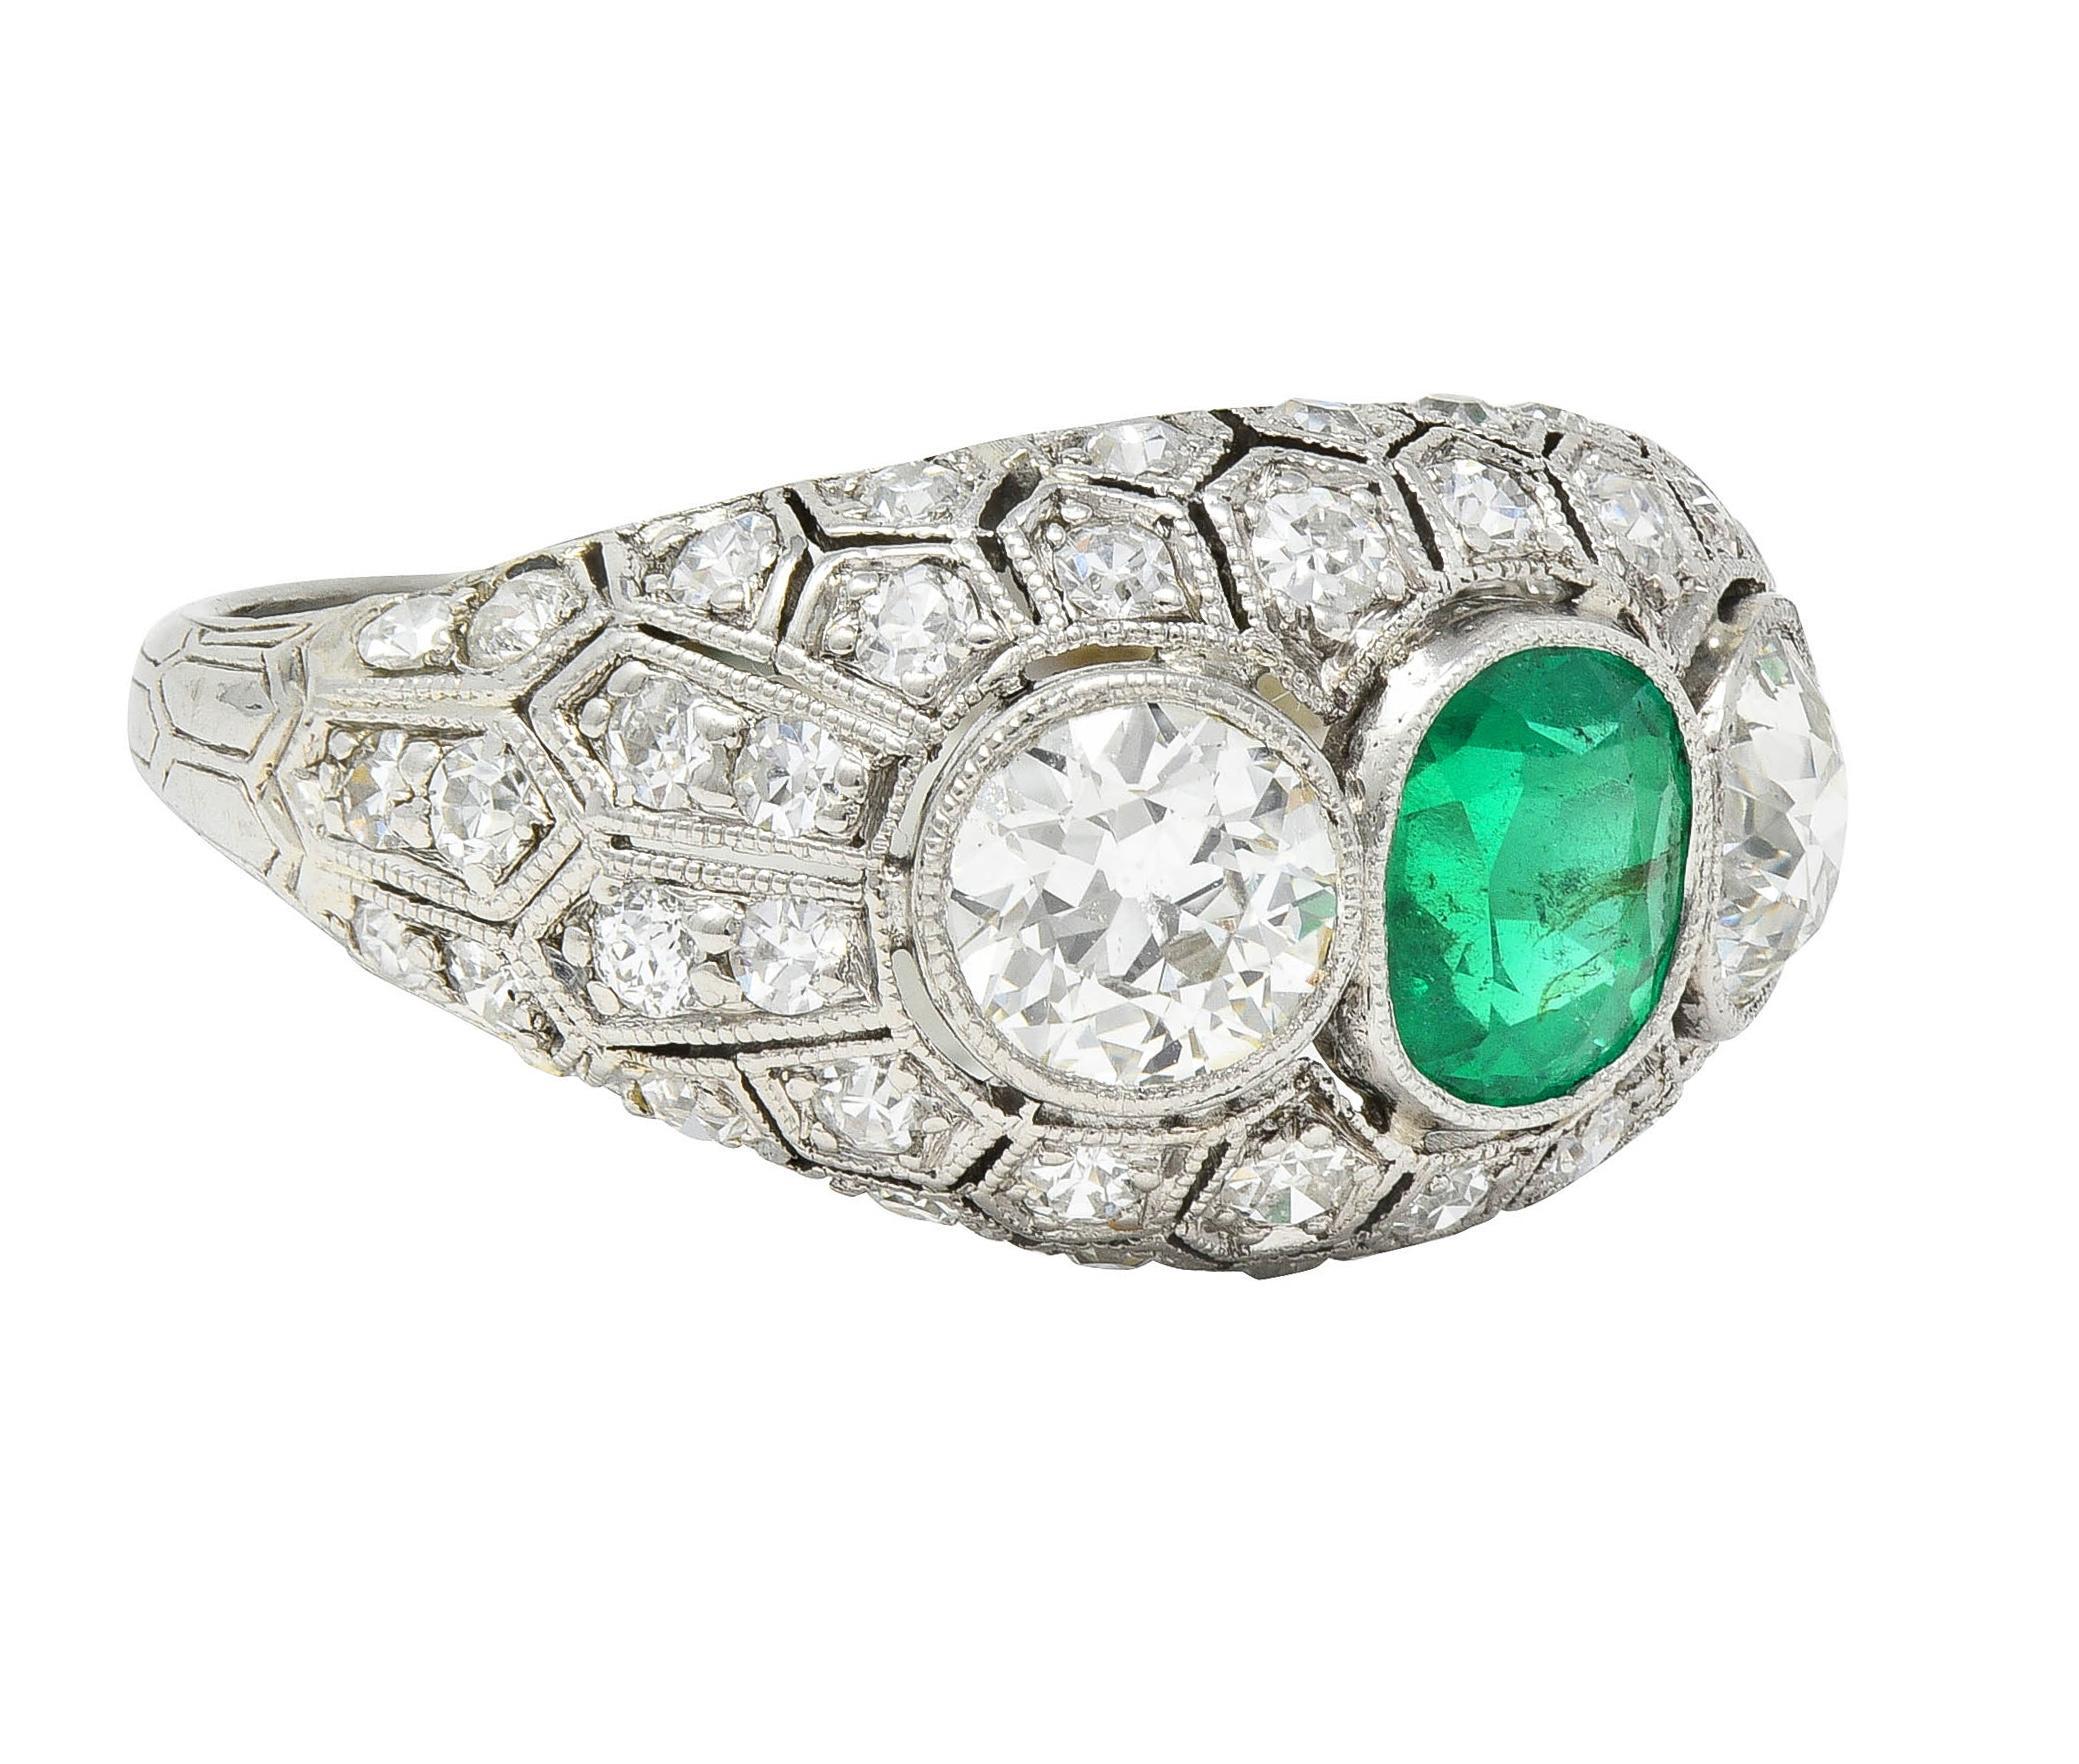 Centering a cushion cut emerald weighing approximately 0.85 carat 
Transparent medium green in color and set in milgrain bezel 
Flanked by old European cut diamonds set in matching bezels
Weighing approximately 1.00 carats total - J color with SI1